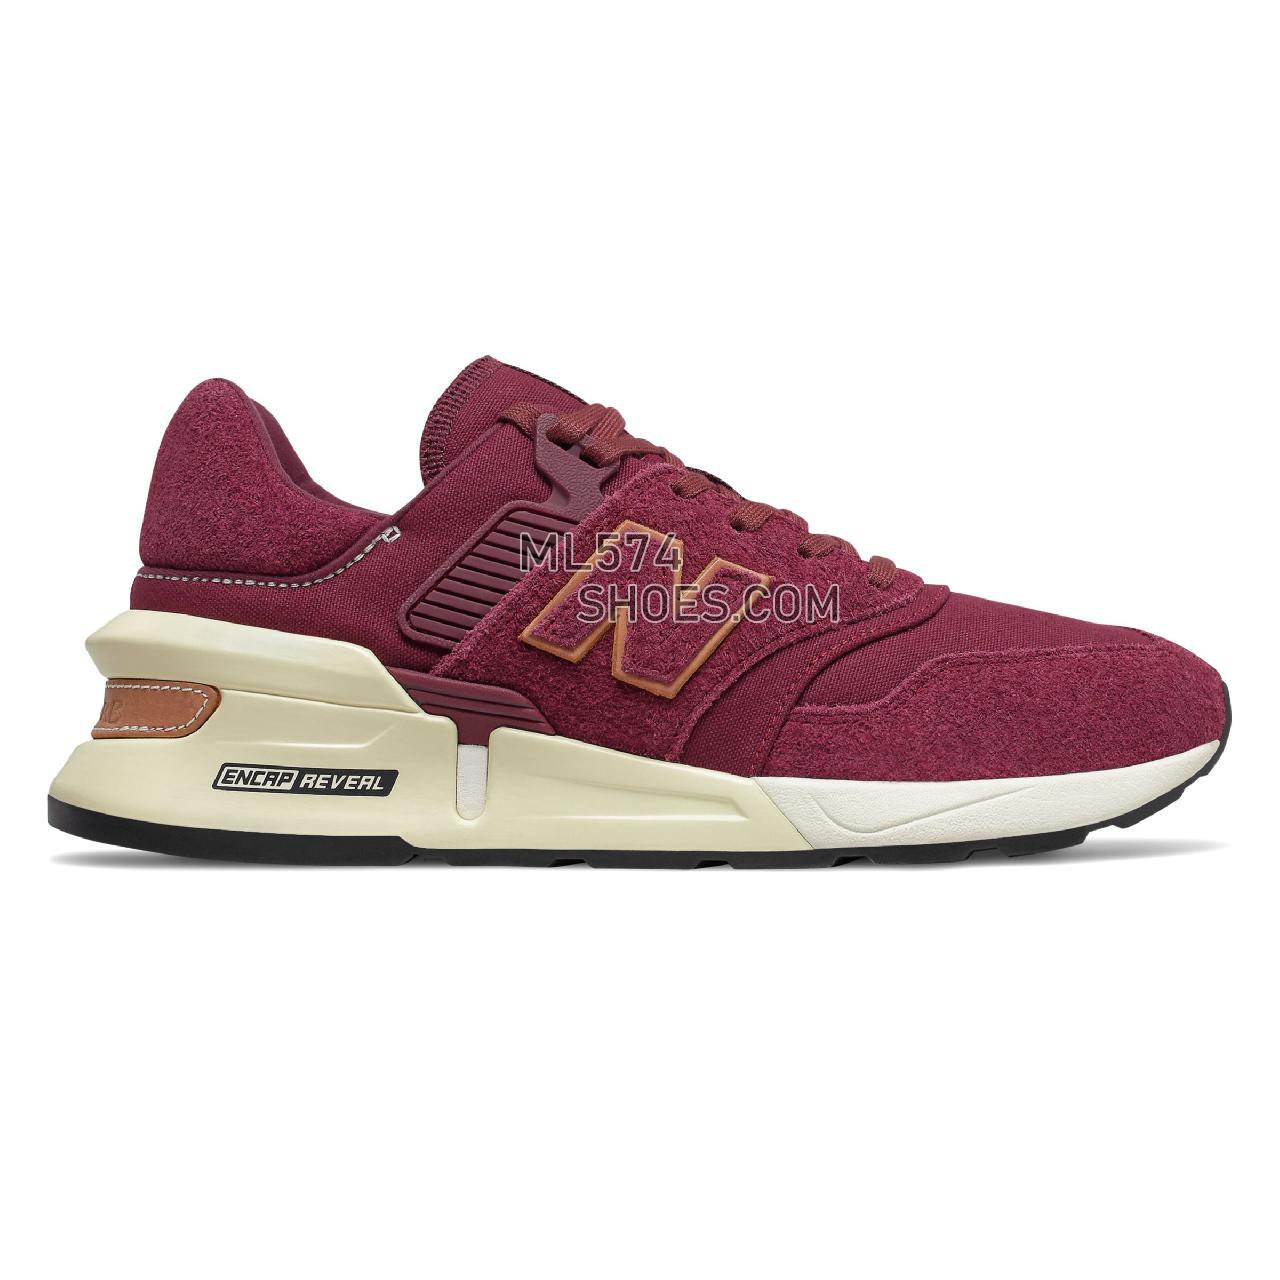 New Balance 997 Sport - Men's Sport Style Sneakers - Classic Burgundy with NB Burgundy - MS997LOH